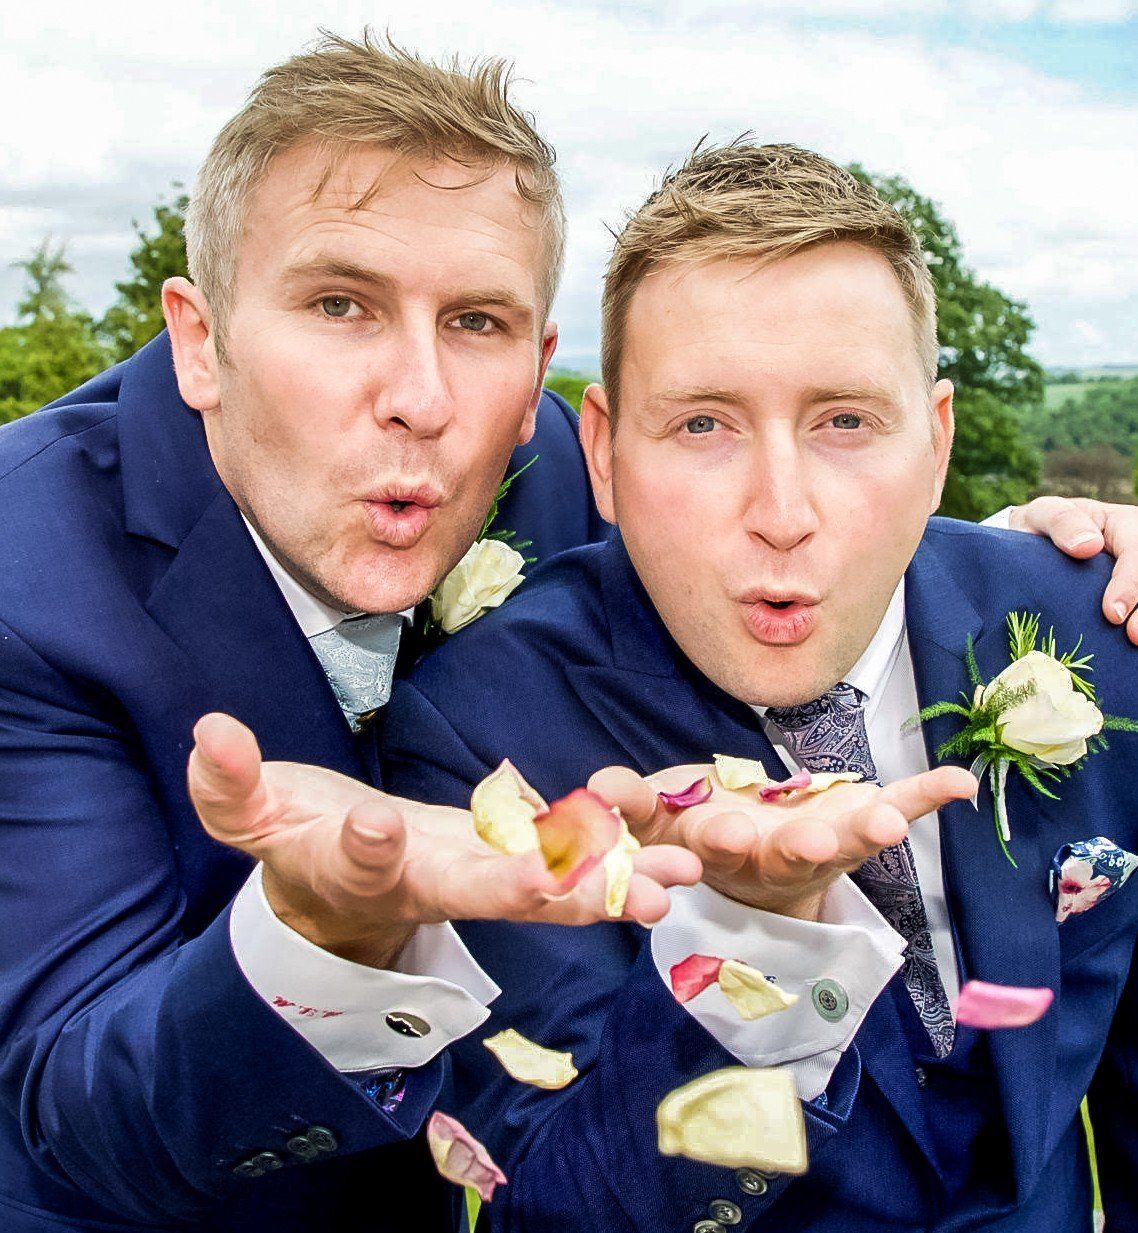 Two happy grooms show their pride with same-sex wedding suits from Adam James Bespoke tailoring. Style doesn't discriminate and neither do I